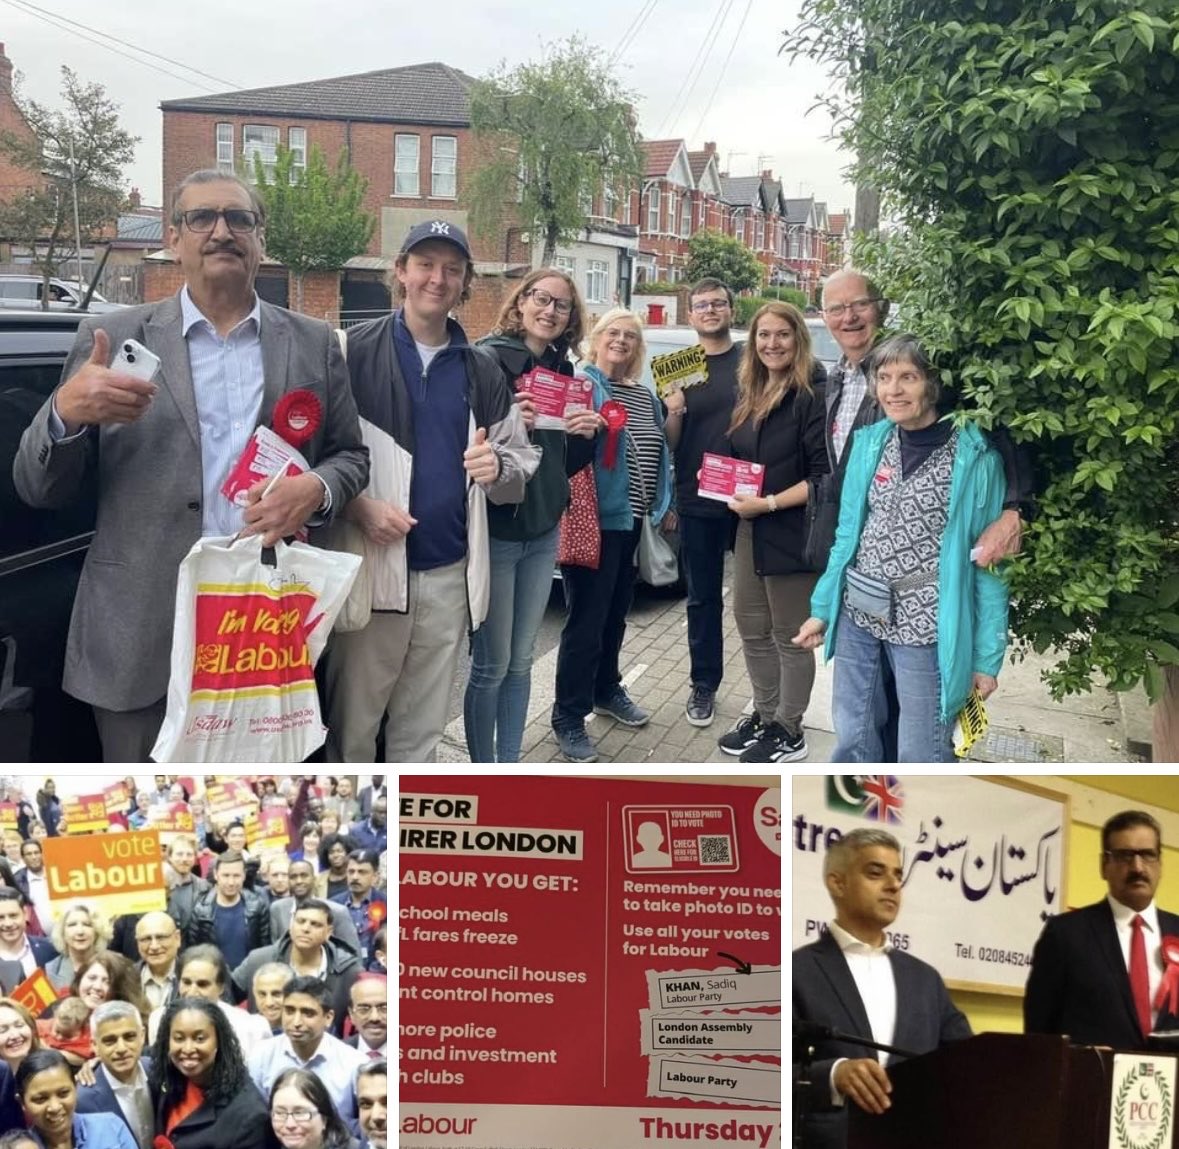 London Mayoral Elections Today Thursday 2 May Vote for @SadiqKhan @KrupeshHirani @LabourParty Don't forget to take your Photo ID with you.@DoorstepLabour@BrentLabour.@ClIrGwenGrahl @CIrRyanHack.Free school meals for every child in primary school only if you elect #SadiqKhan